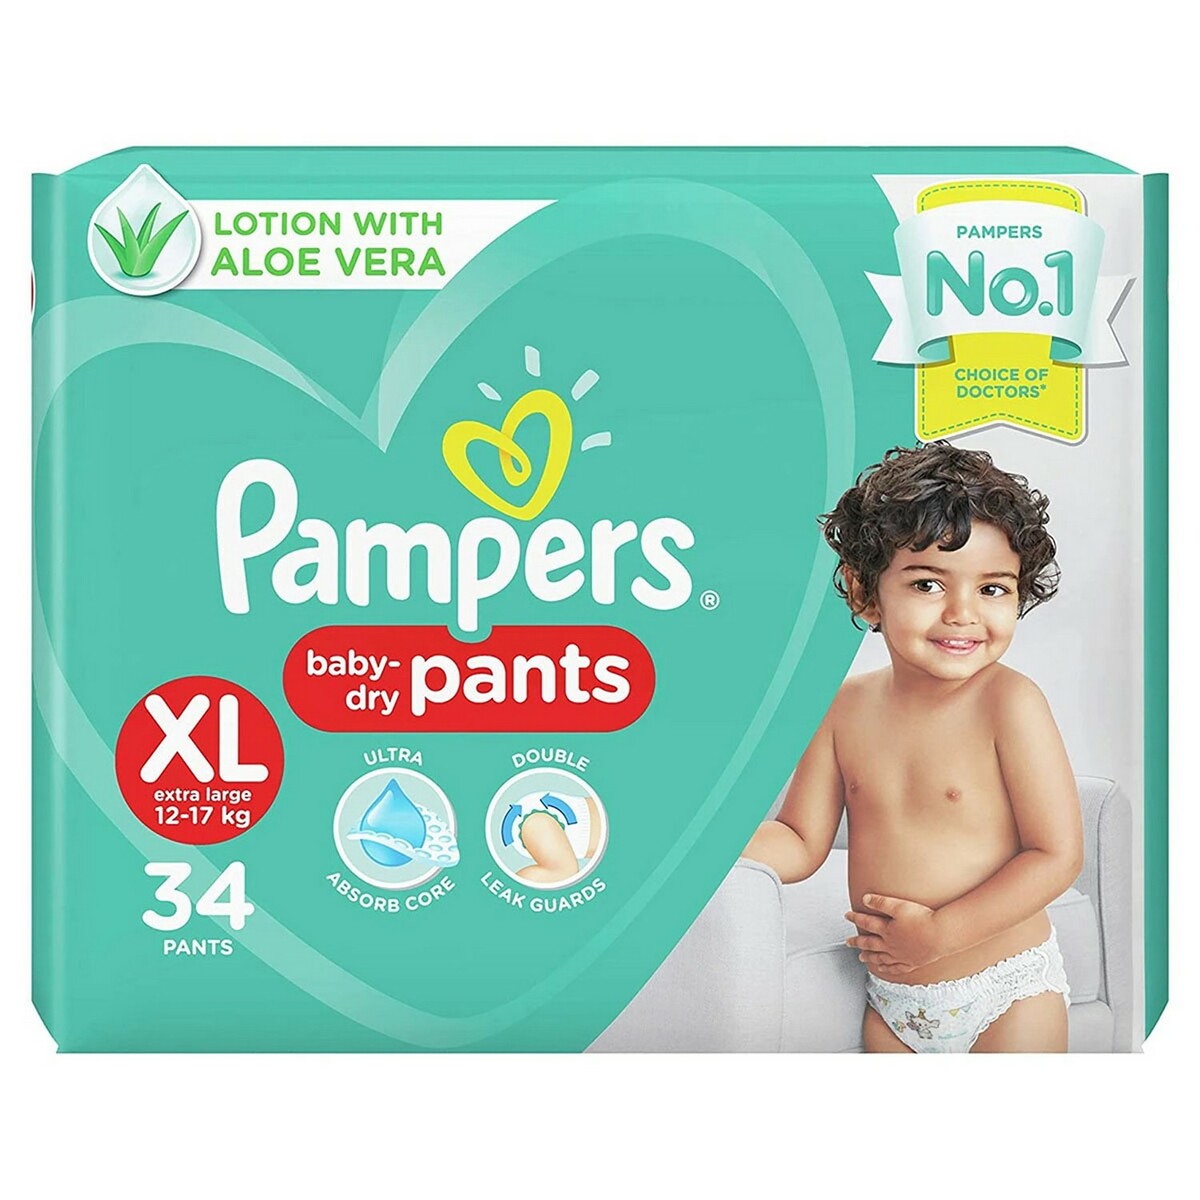 Pampers Diaper Pants XL 34's